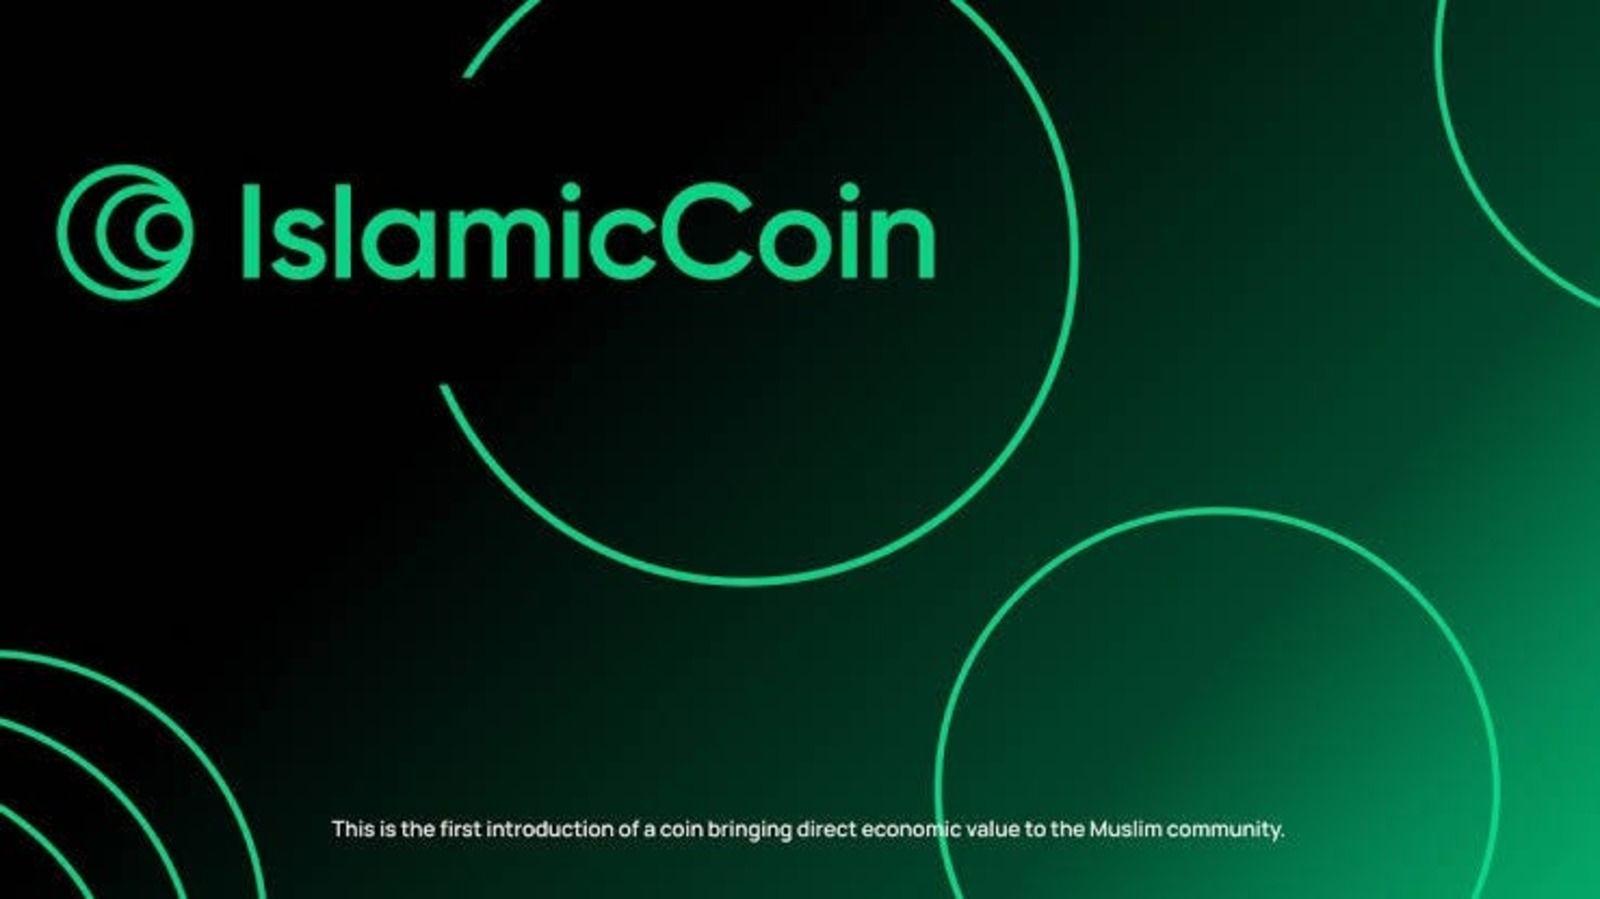 Three Predictions for The Future of Islamic Coin and HAQQ Blockchain